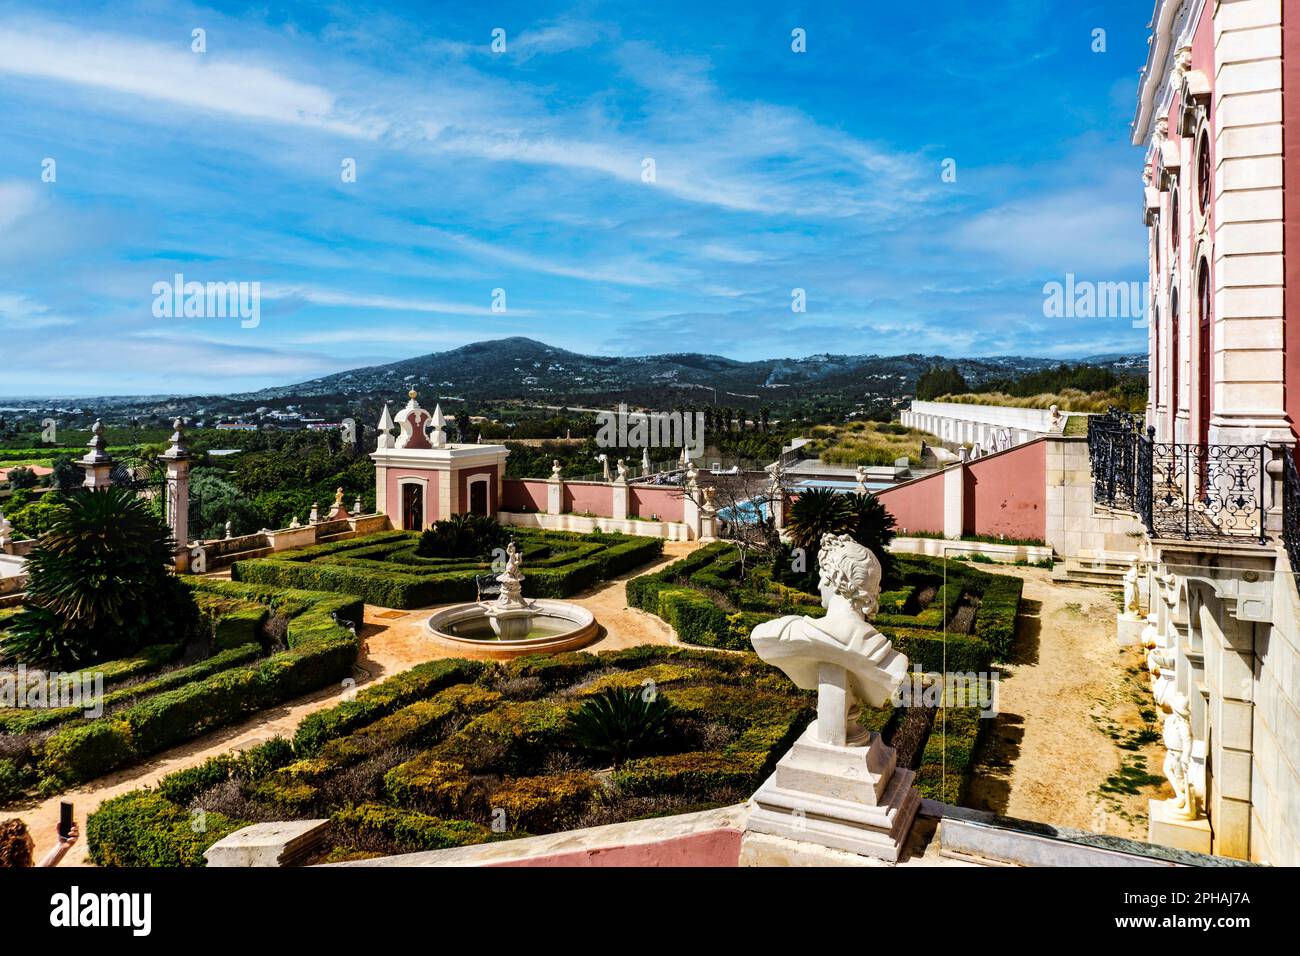 Section of the grounds of the Estoi Palace Hotel in Portugal. A building that can trace its history back to 1780s and is built in the Rococo style. Stock Photo